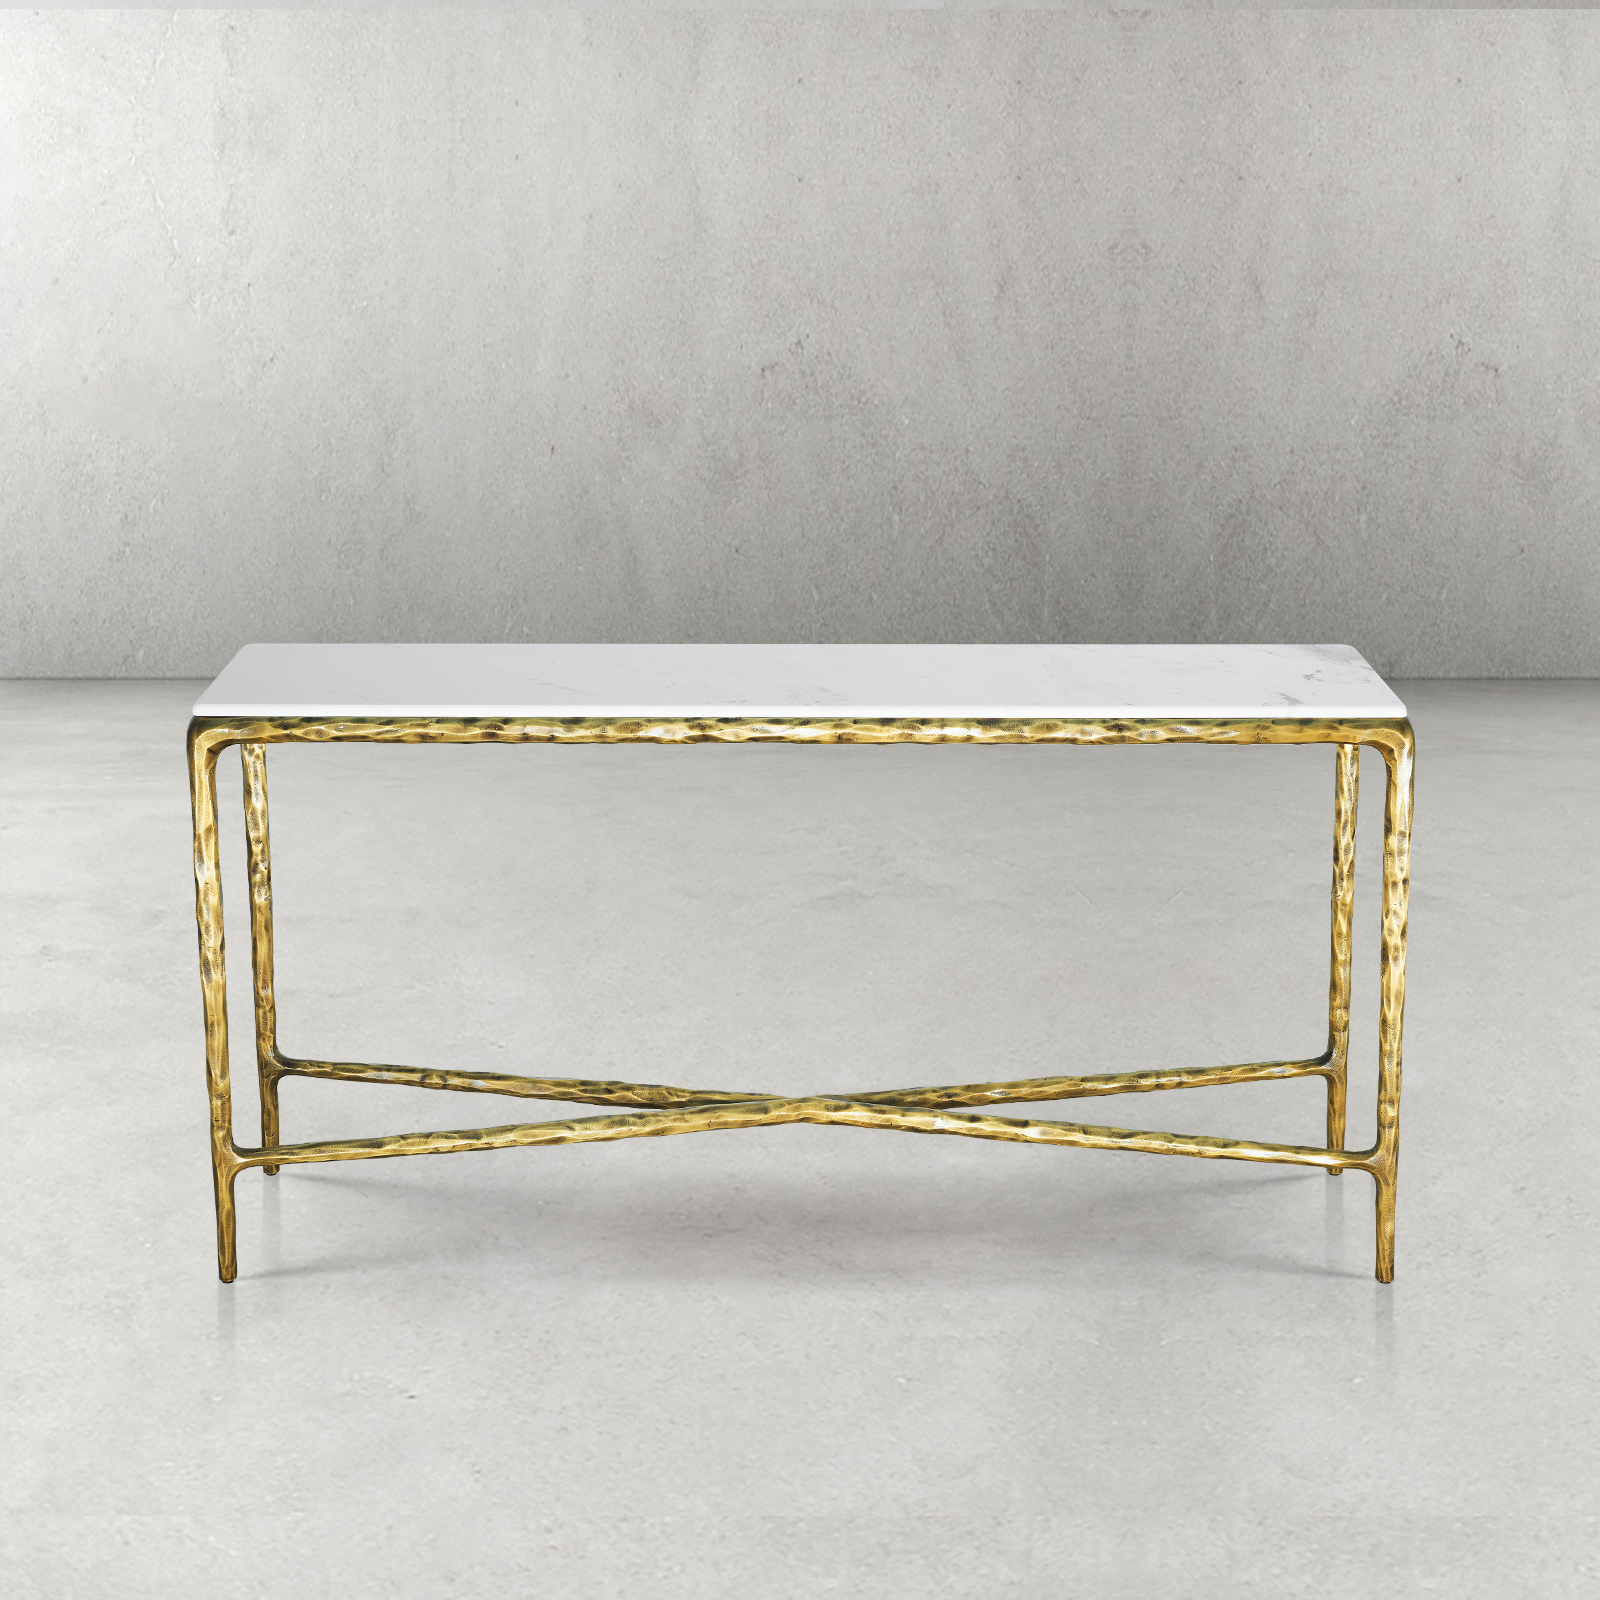 Thaddeus Marble Console Table 60"W